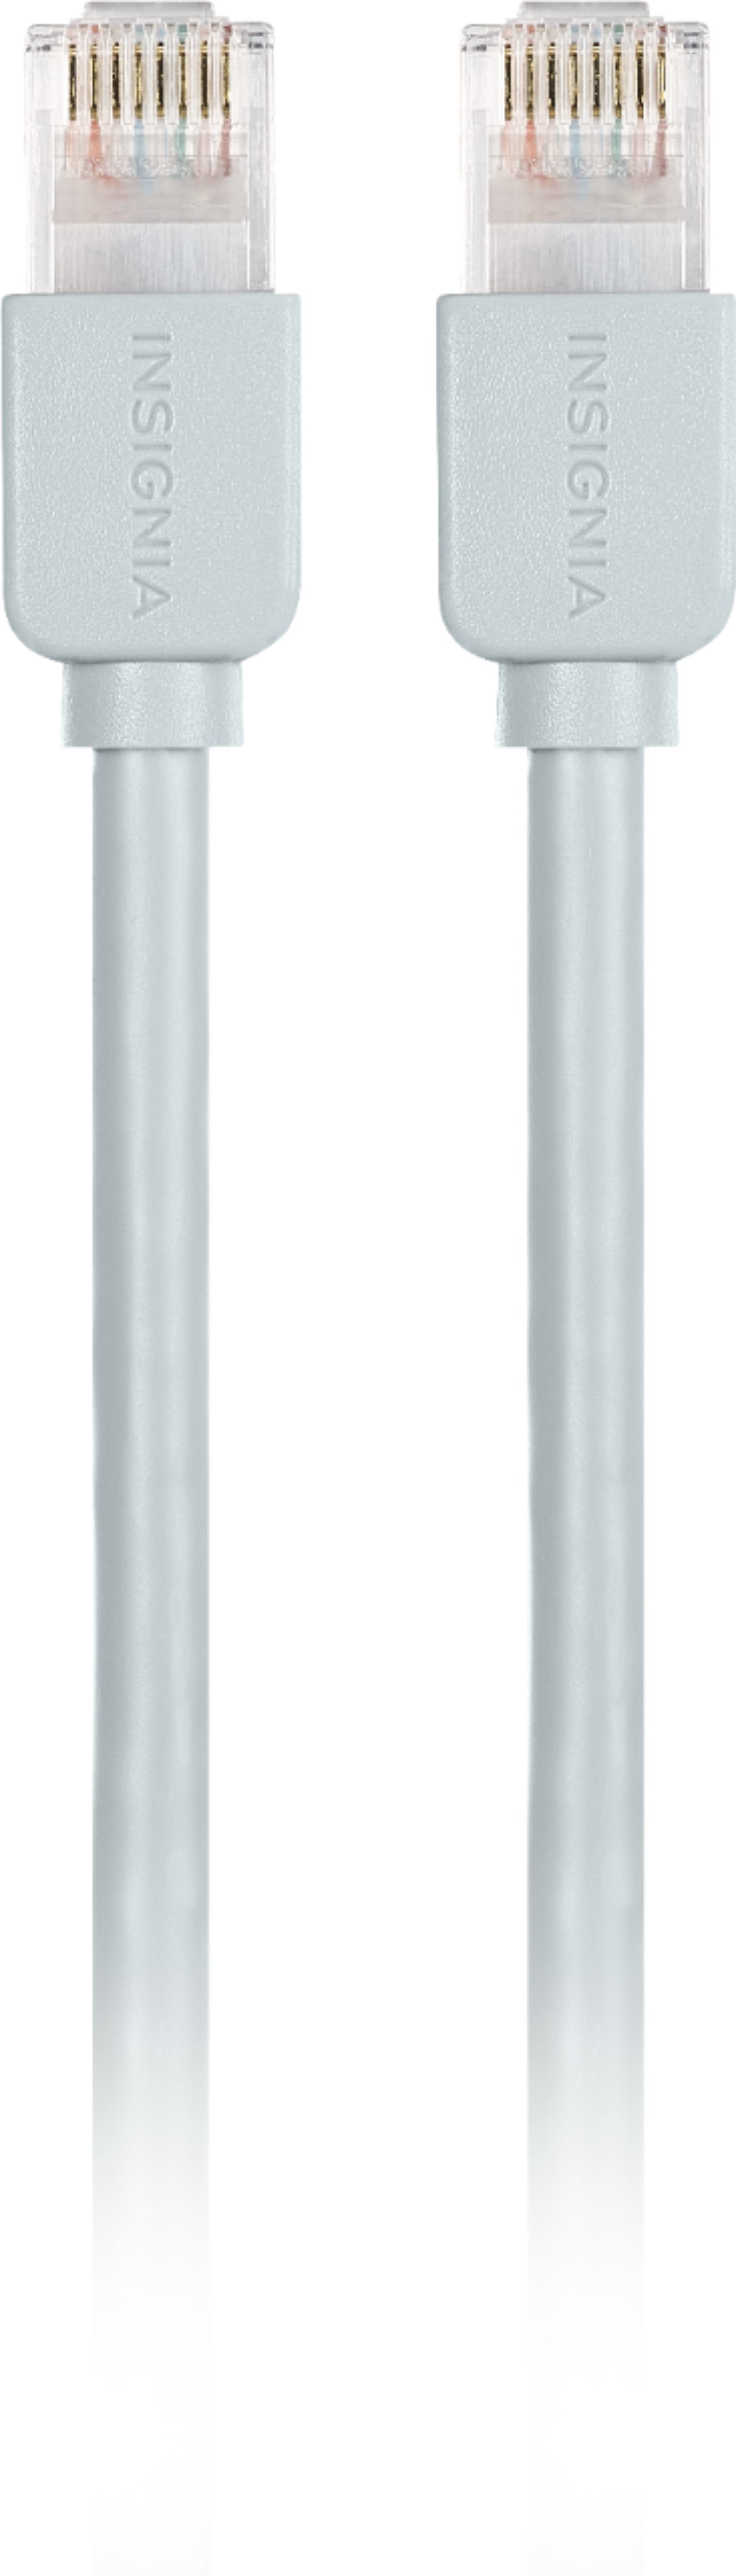 Angle View: Insignia™ - 8 foot Cat-6 Ethernet Cable - Gray